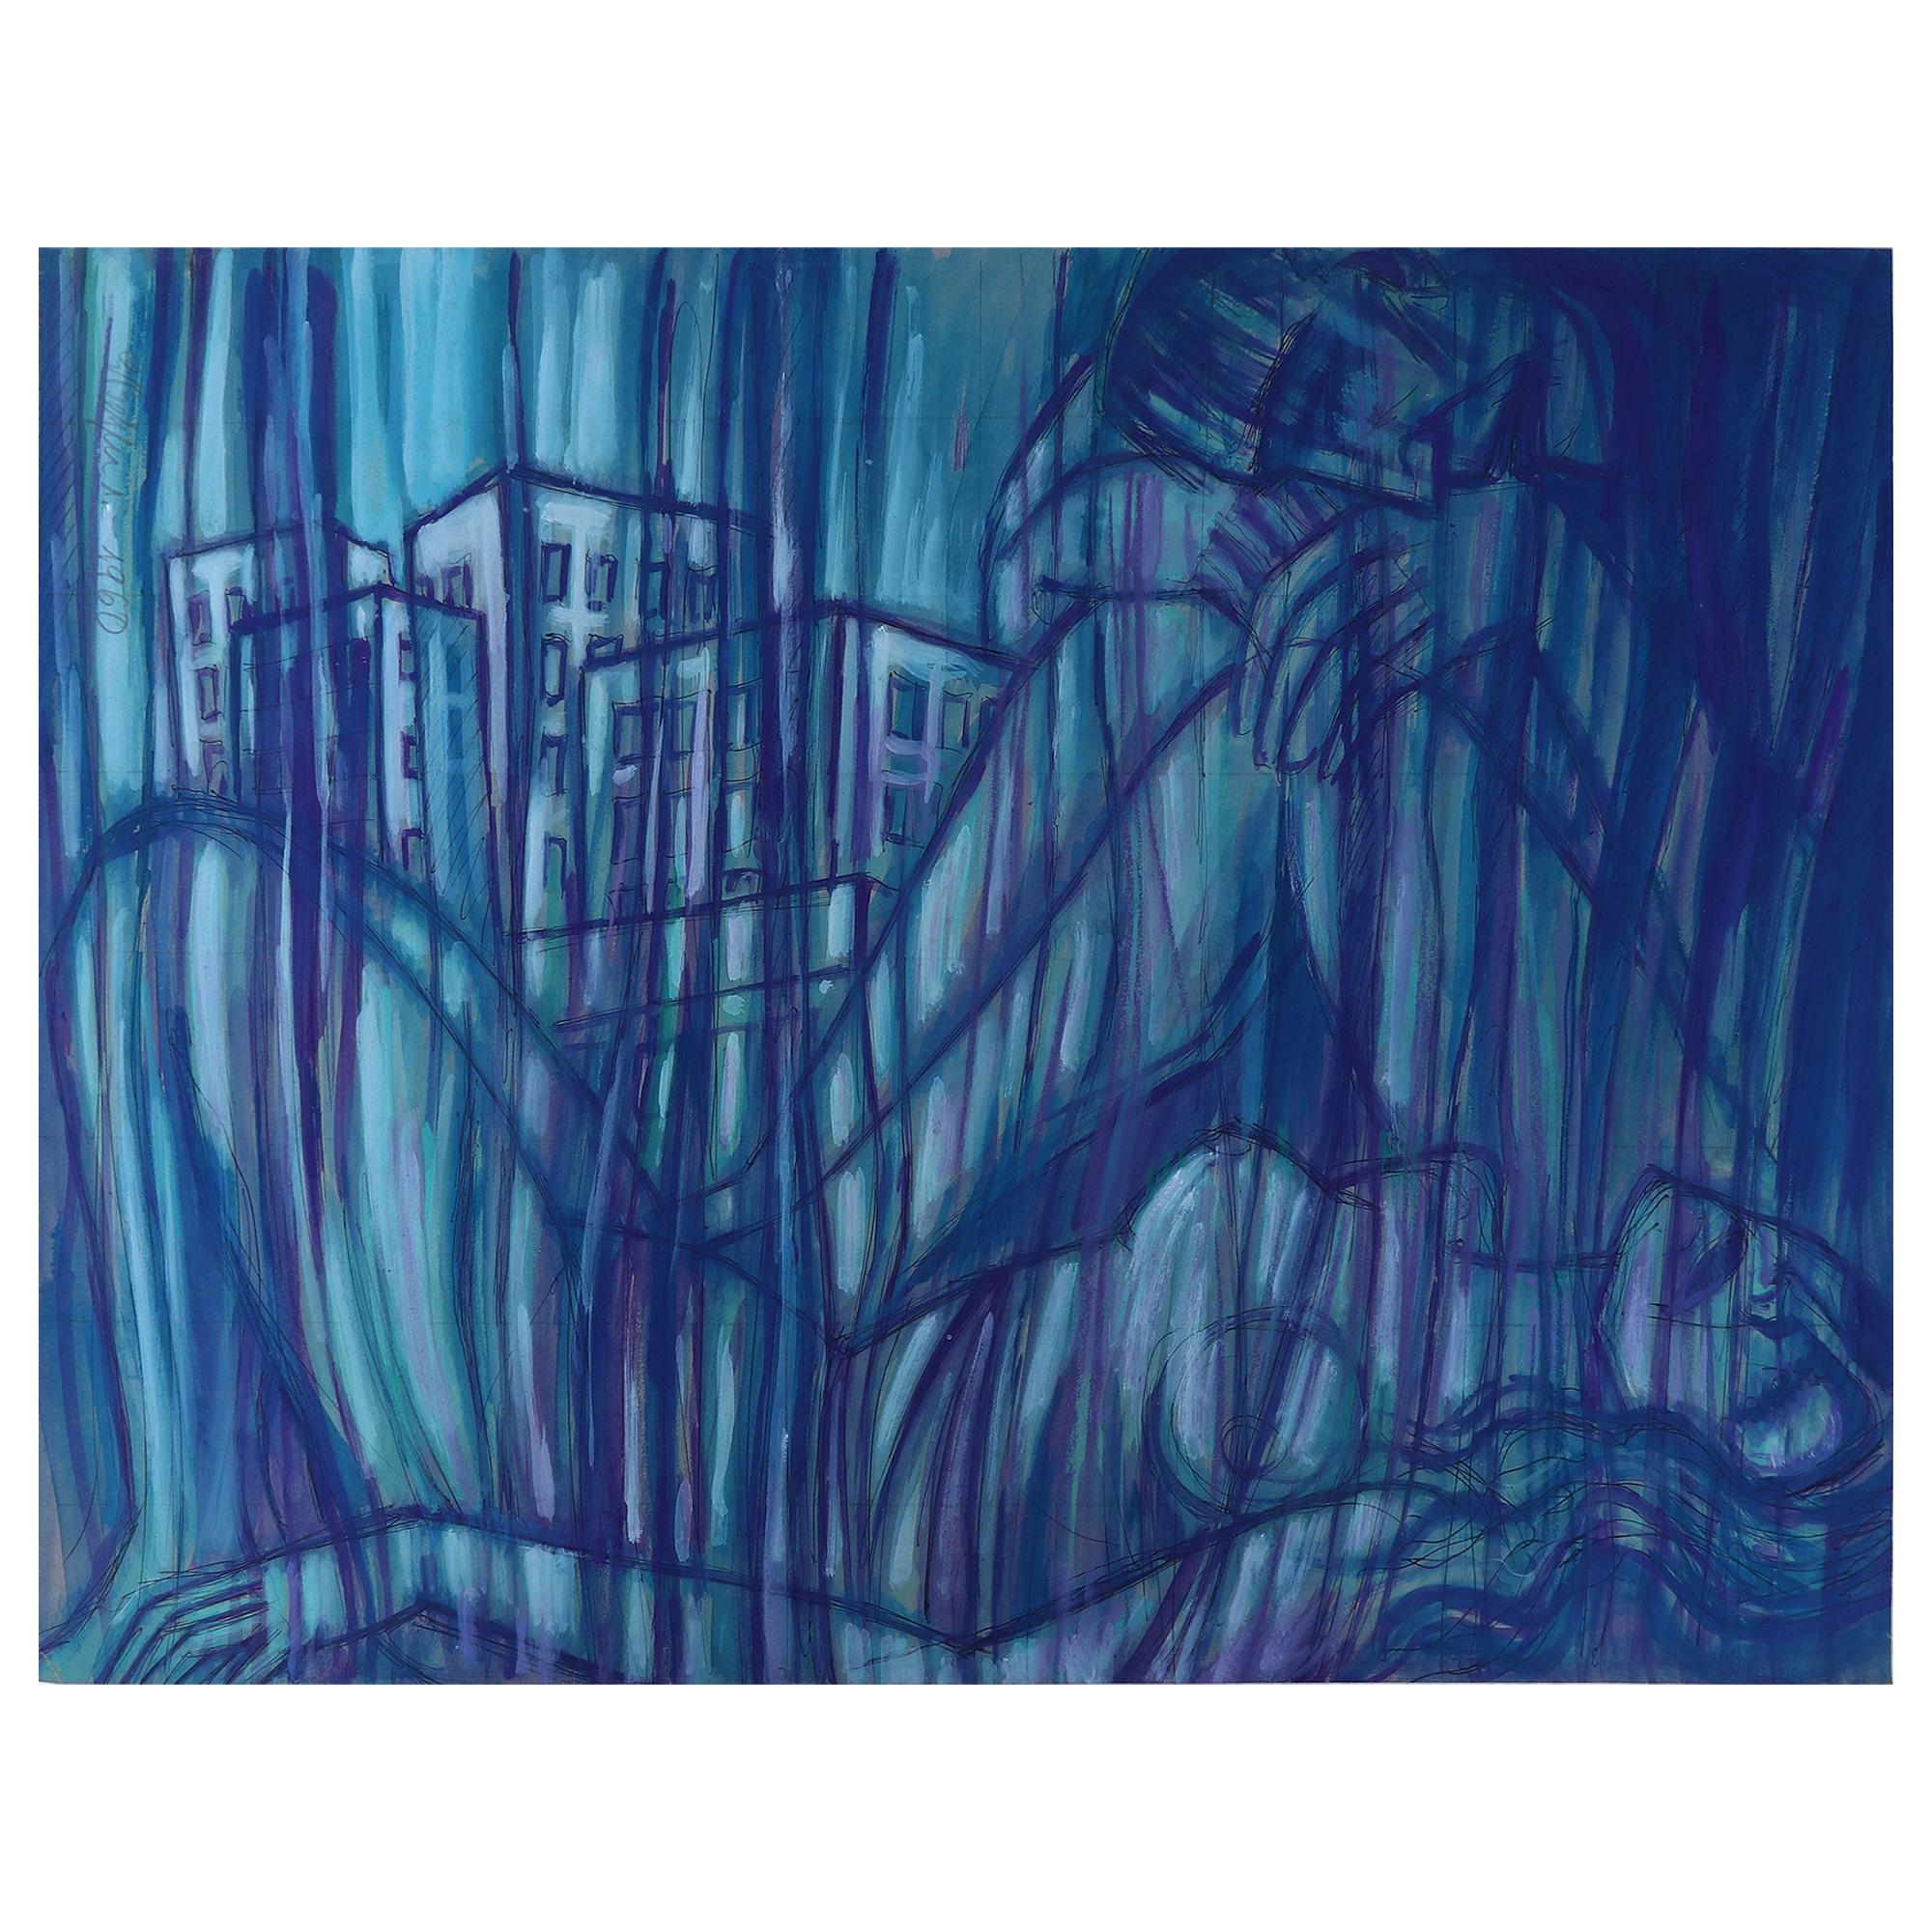 Emil Betzler 'Couple in Blue'' German Expressionist Painting